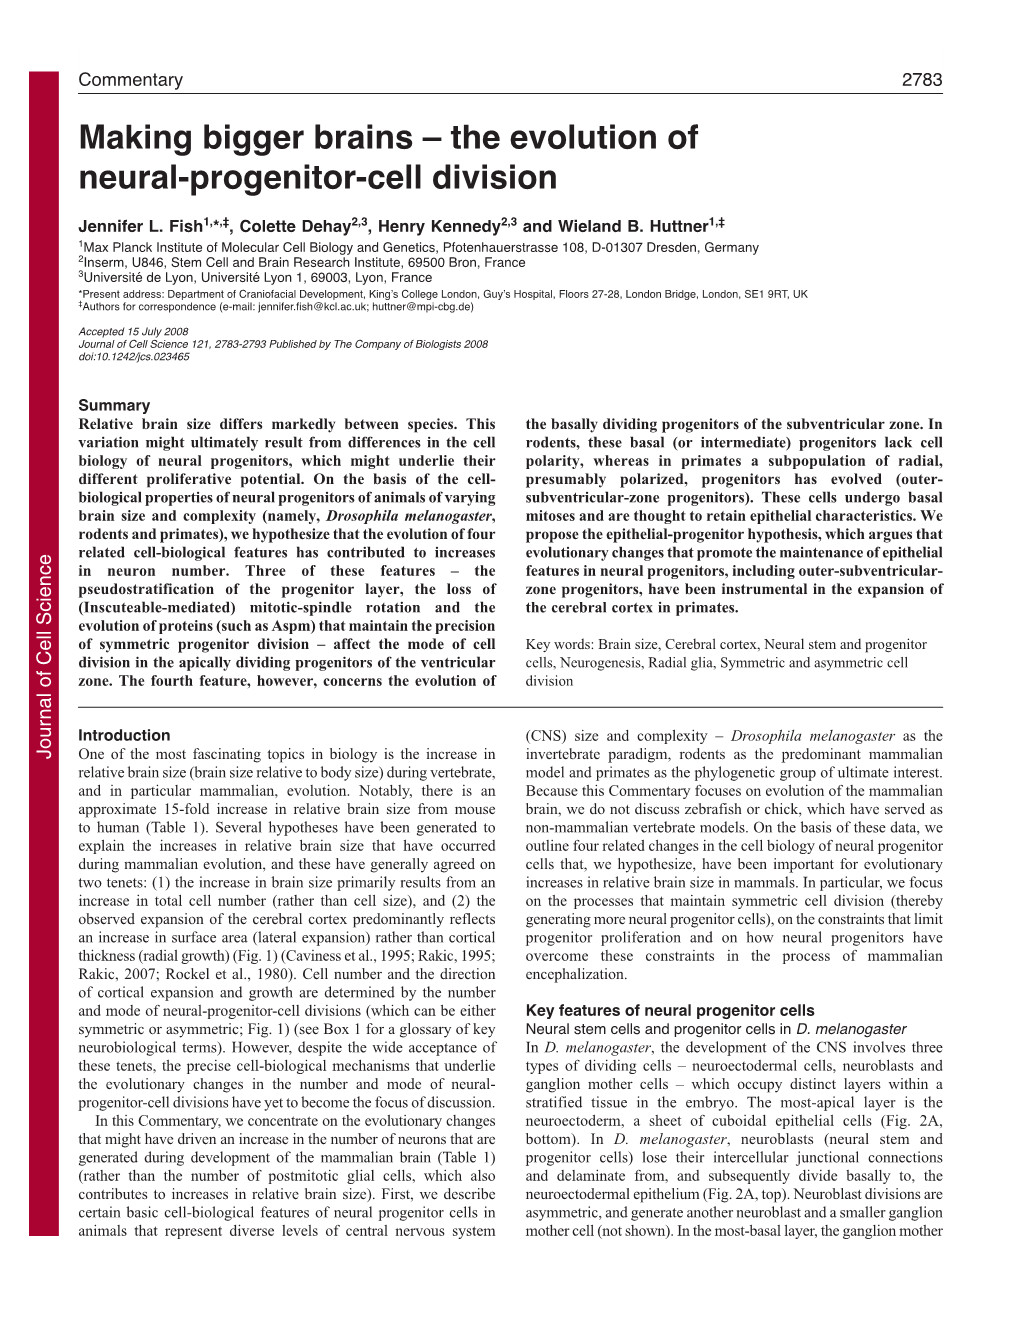 The Evolution of Neural-Progenitor-Cell Division